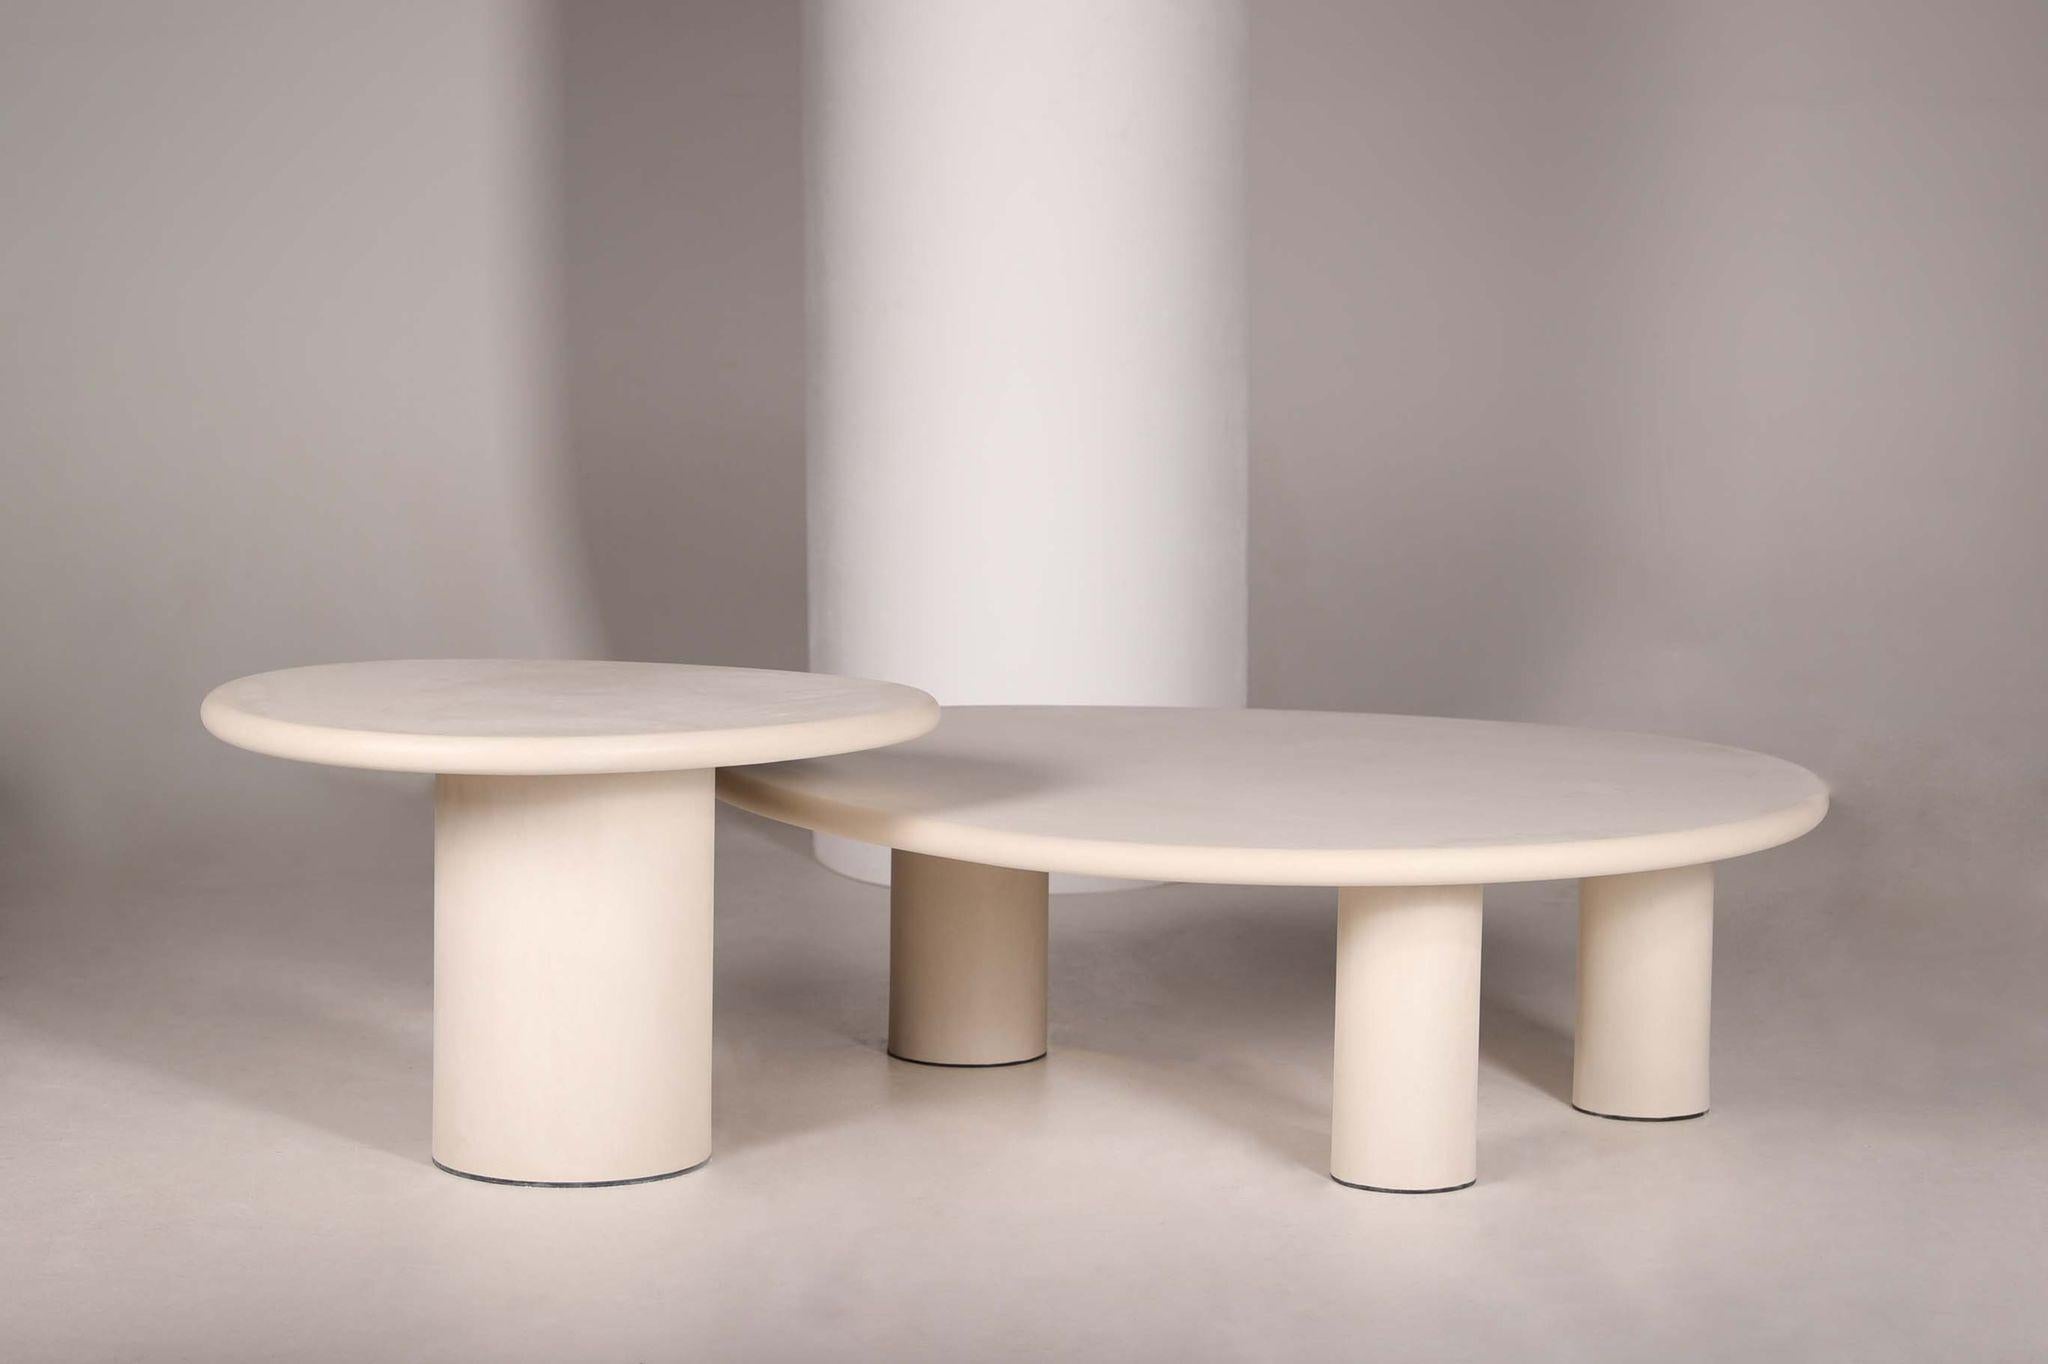 Handmade rock-shaped natural plaster table set by Galerie Philia Edition
Dimensions: 
80 x 60 x 50, foot Ø 30 cm
130 x 100 x 38, foot Ø 20 cm 
Materials: mineral lime plaster.

Our tables are in mineral lime plaster, unlike mortex, they are